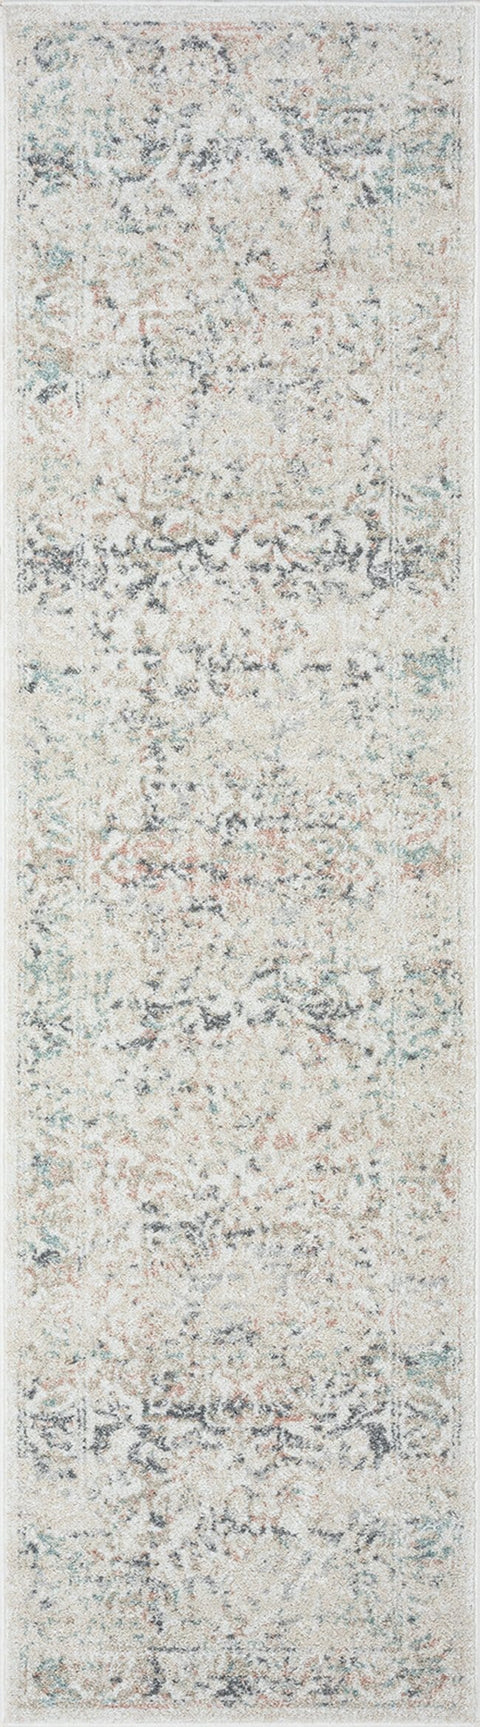 Elouise Cream And Grey Multi-Color Traditional Floral Runner Rug